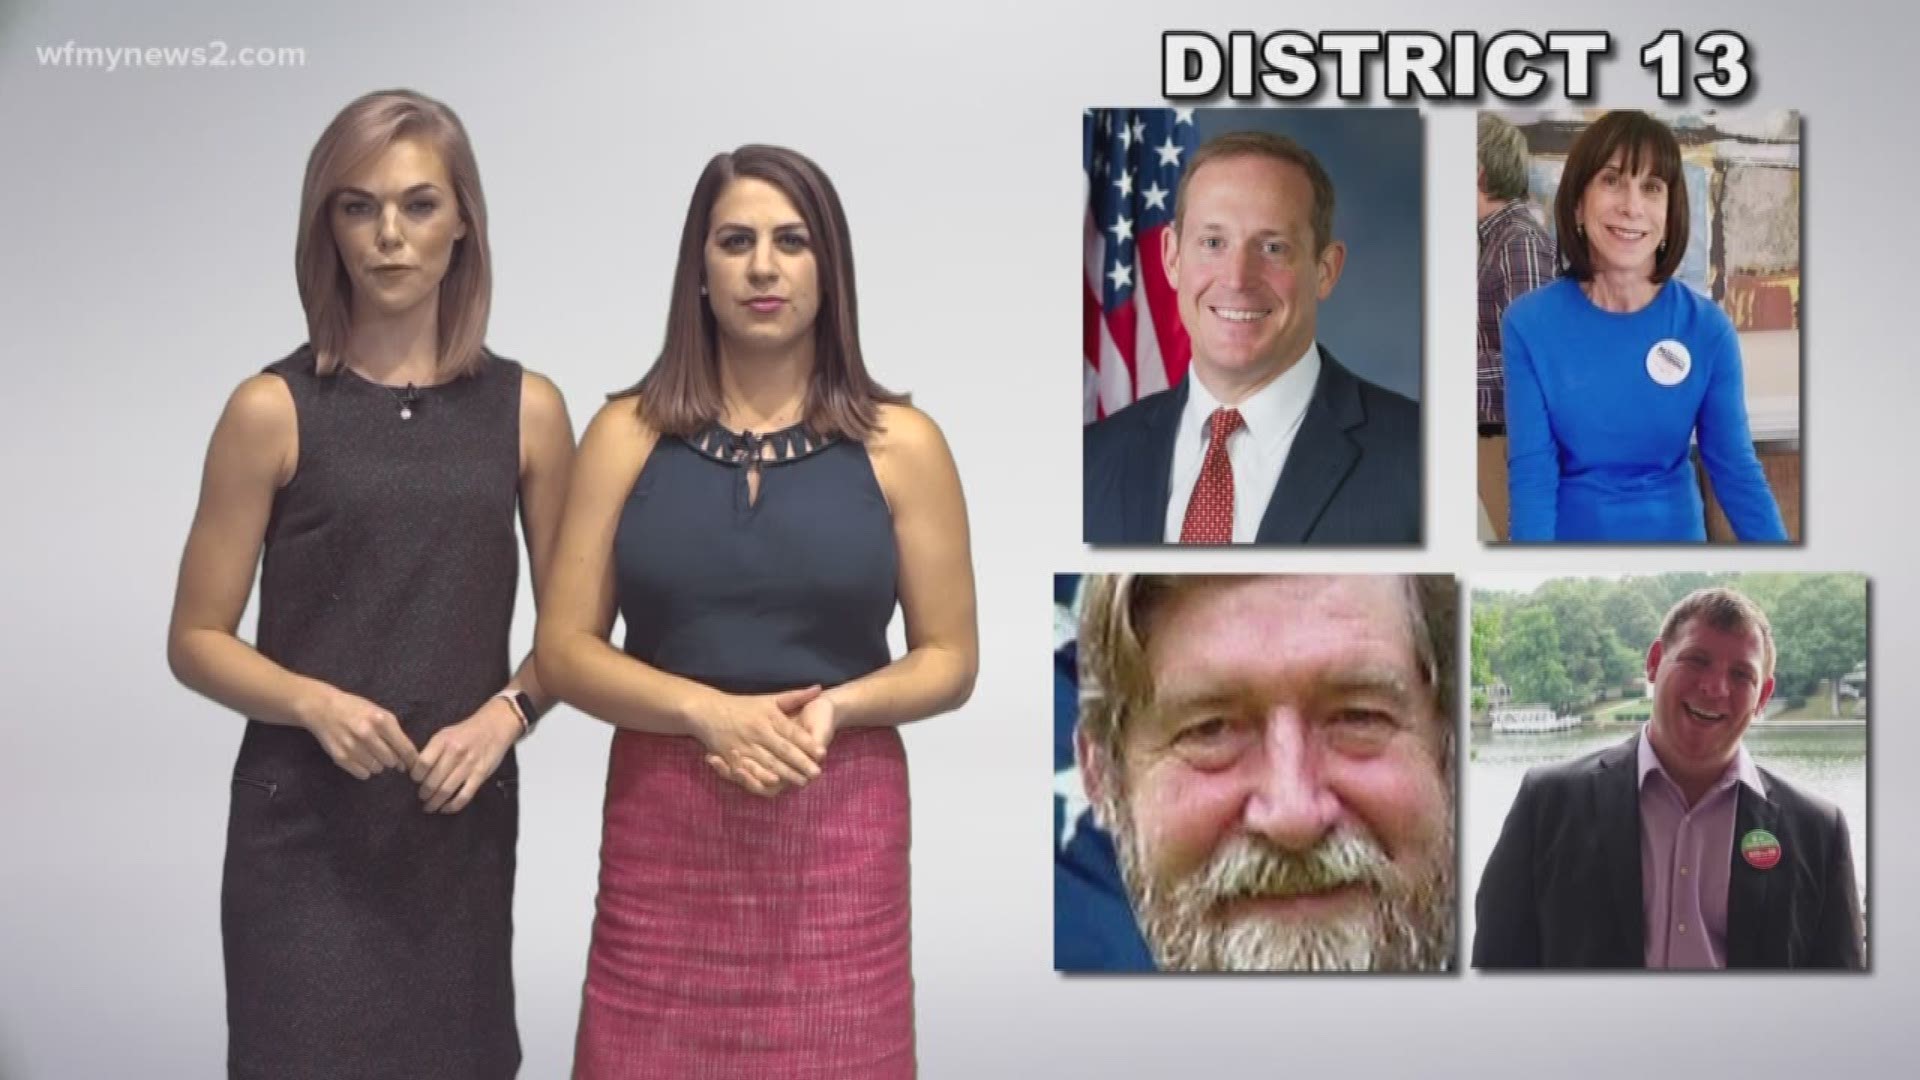 From the money they raised, to where they stand on key issues, take a closer look at one of the biggest election races in our area.